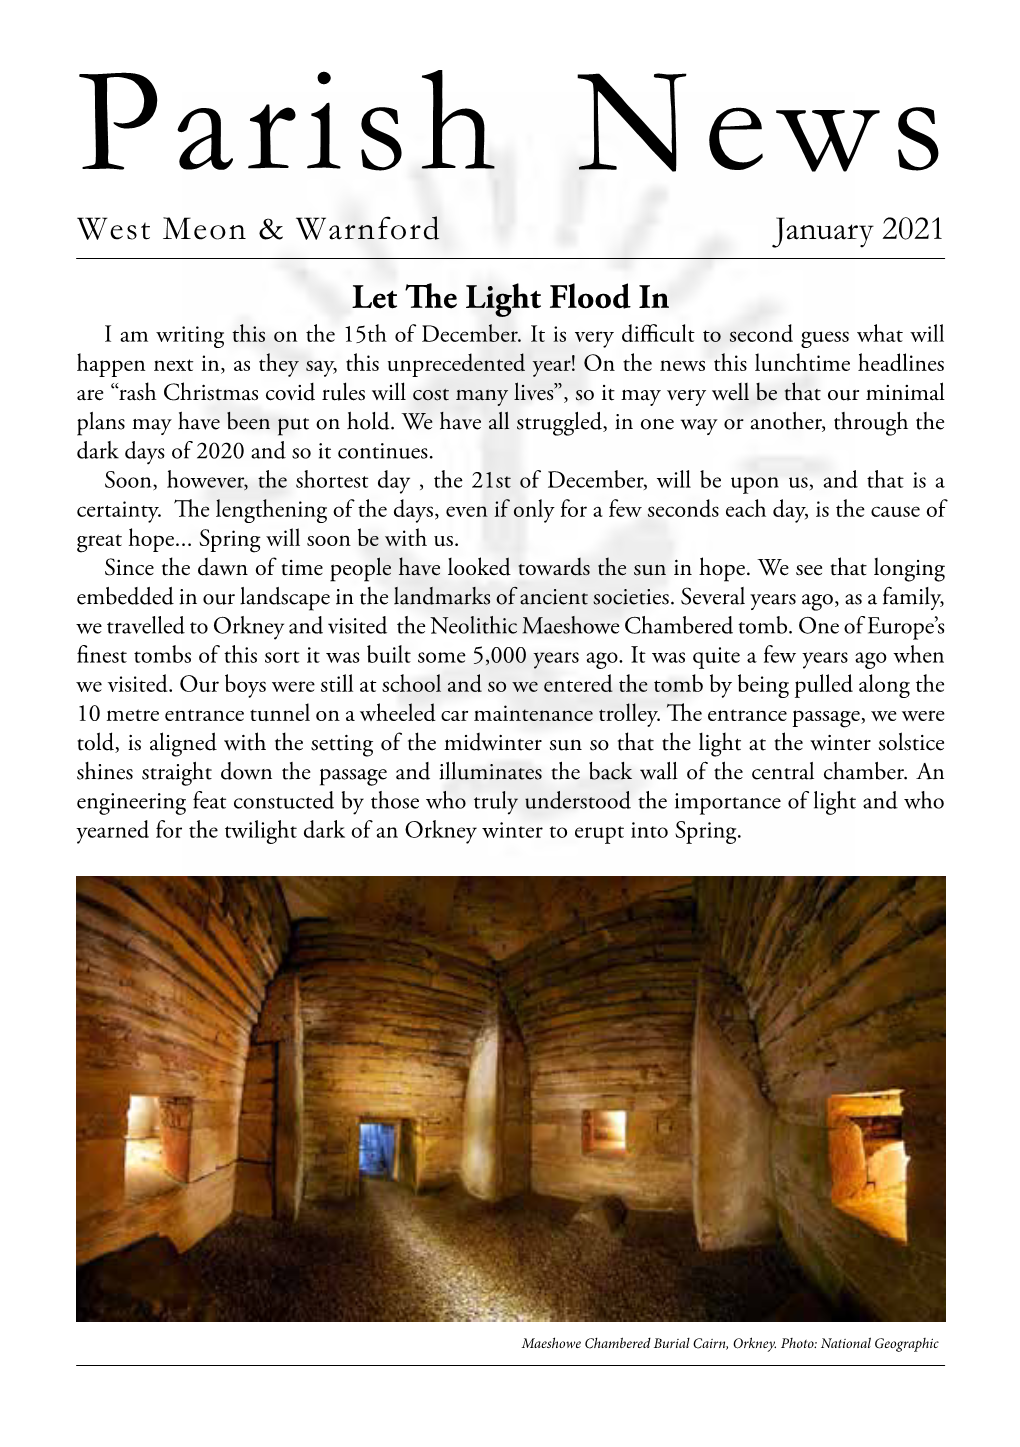 Parish News West Meon & Warnford January 2021 Let the Light Flood in I Am Writing This on the 15Th of December